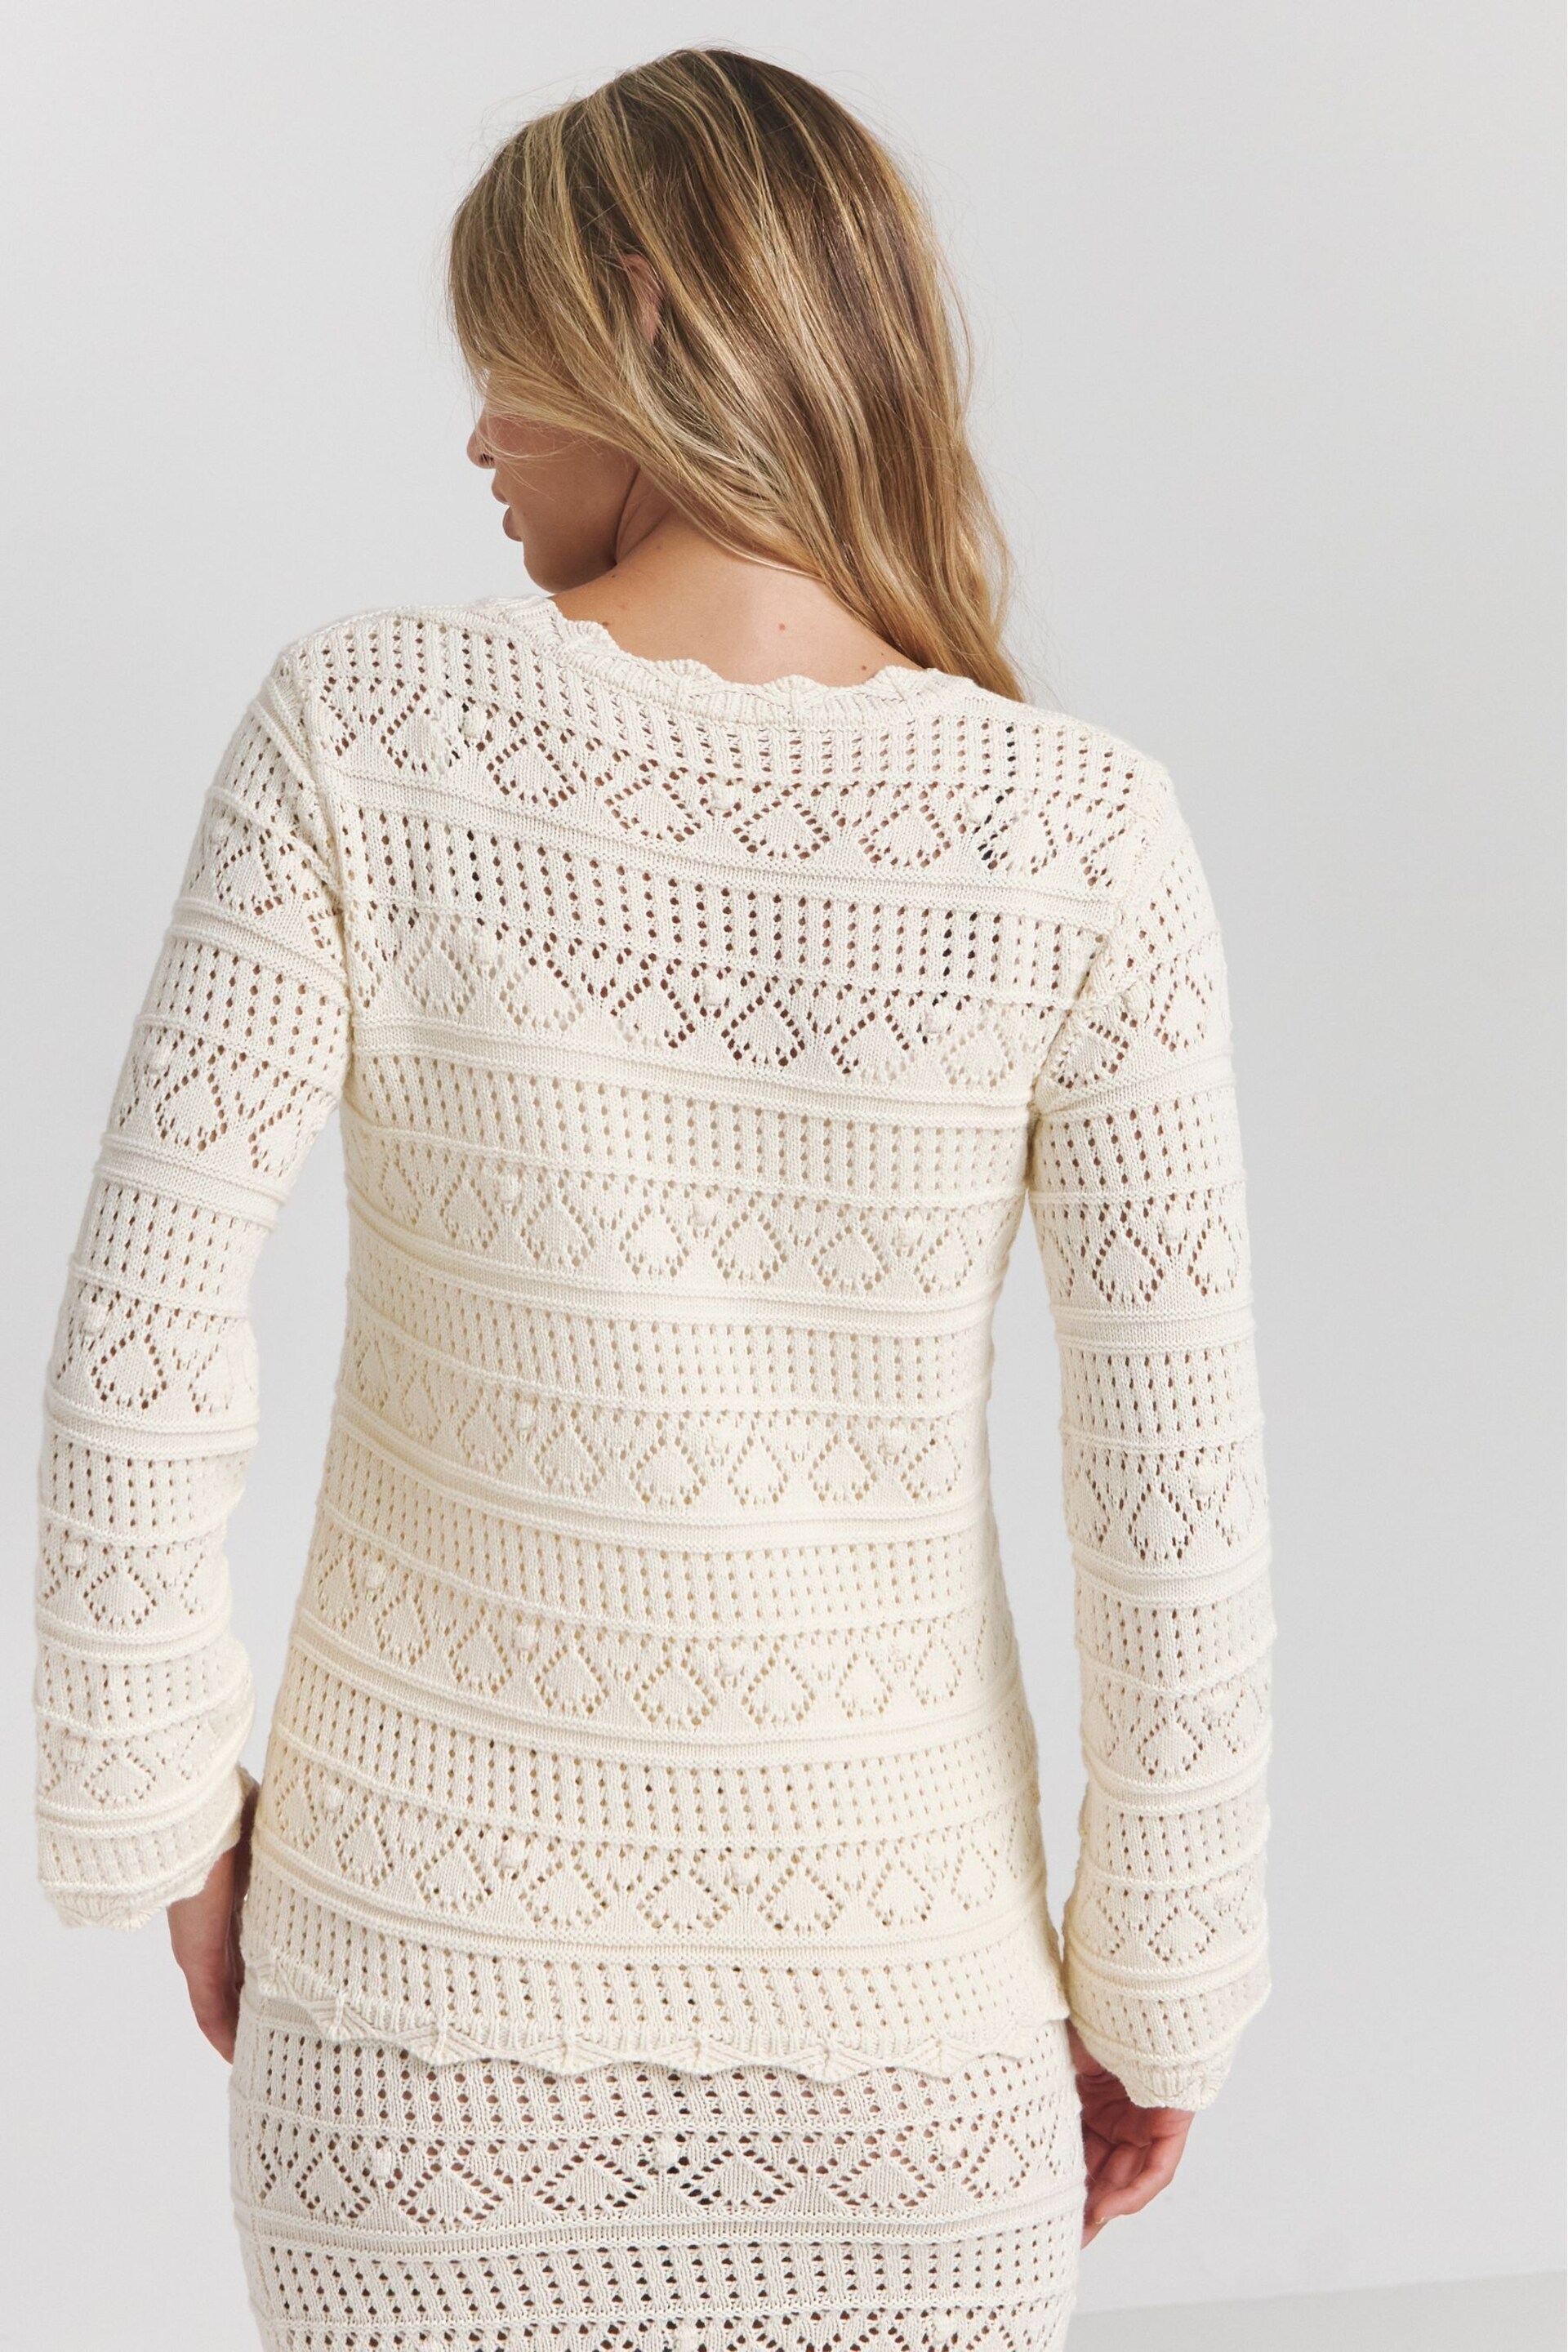 Simply Be Cream Crochet Co-ord Jumper - Image 3 of 4